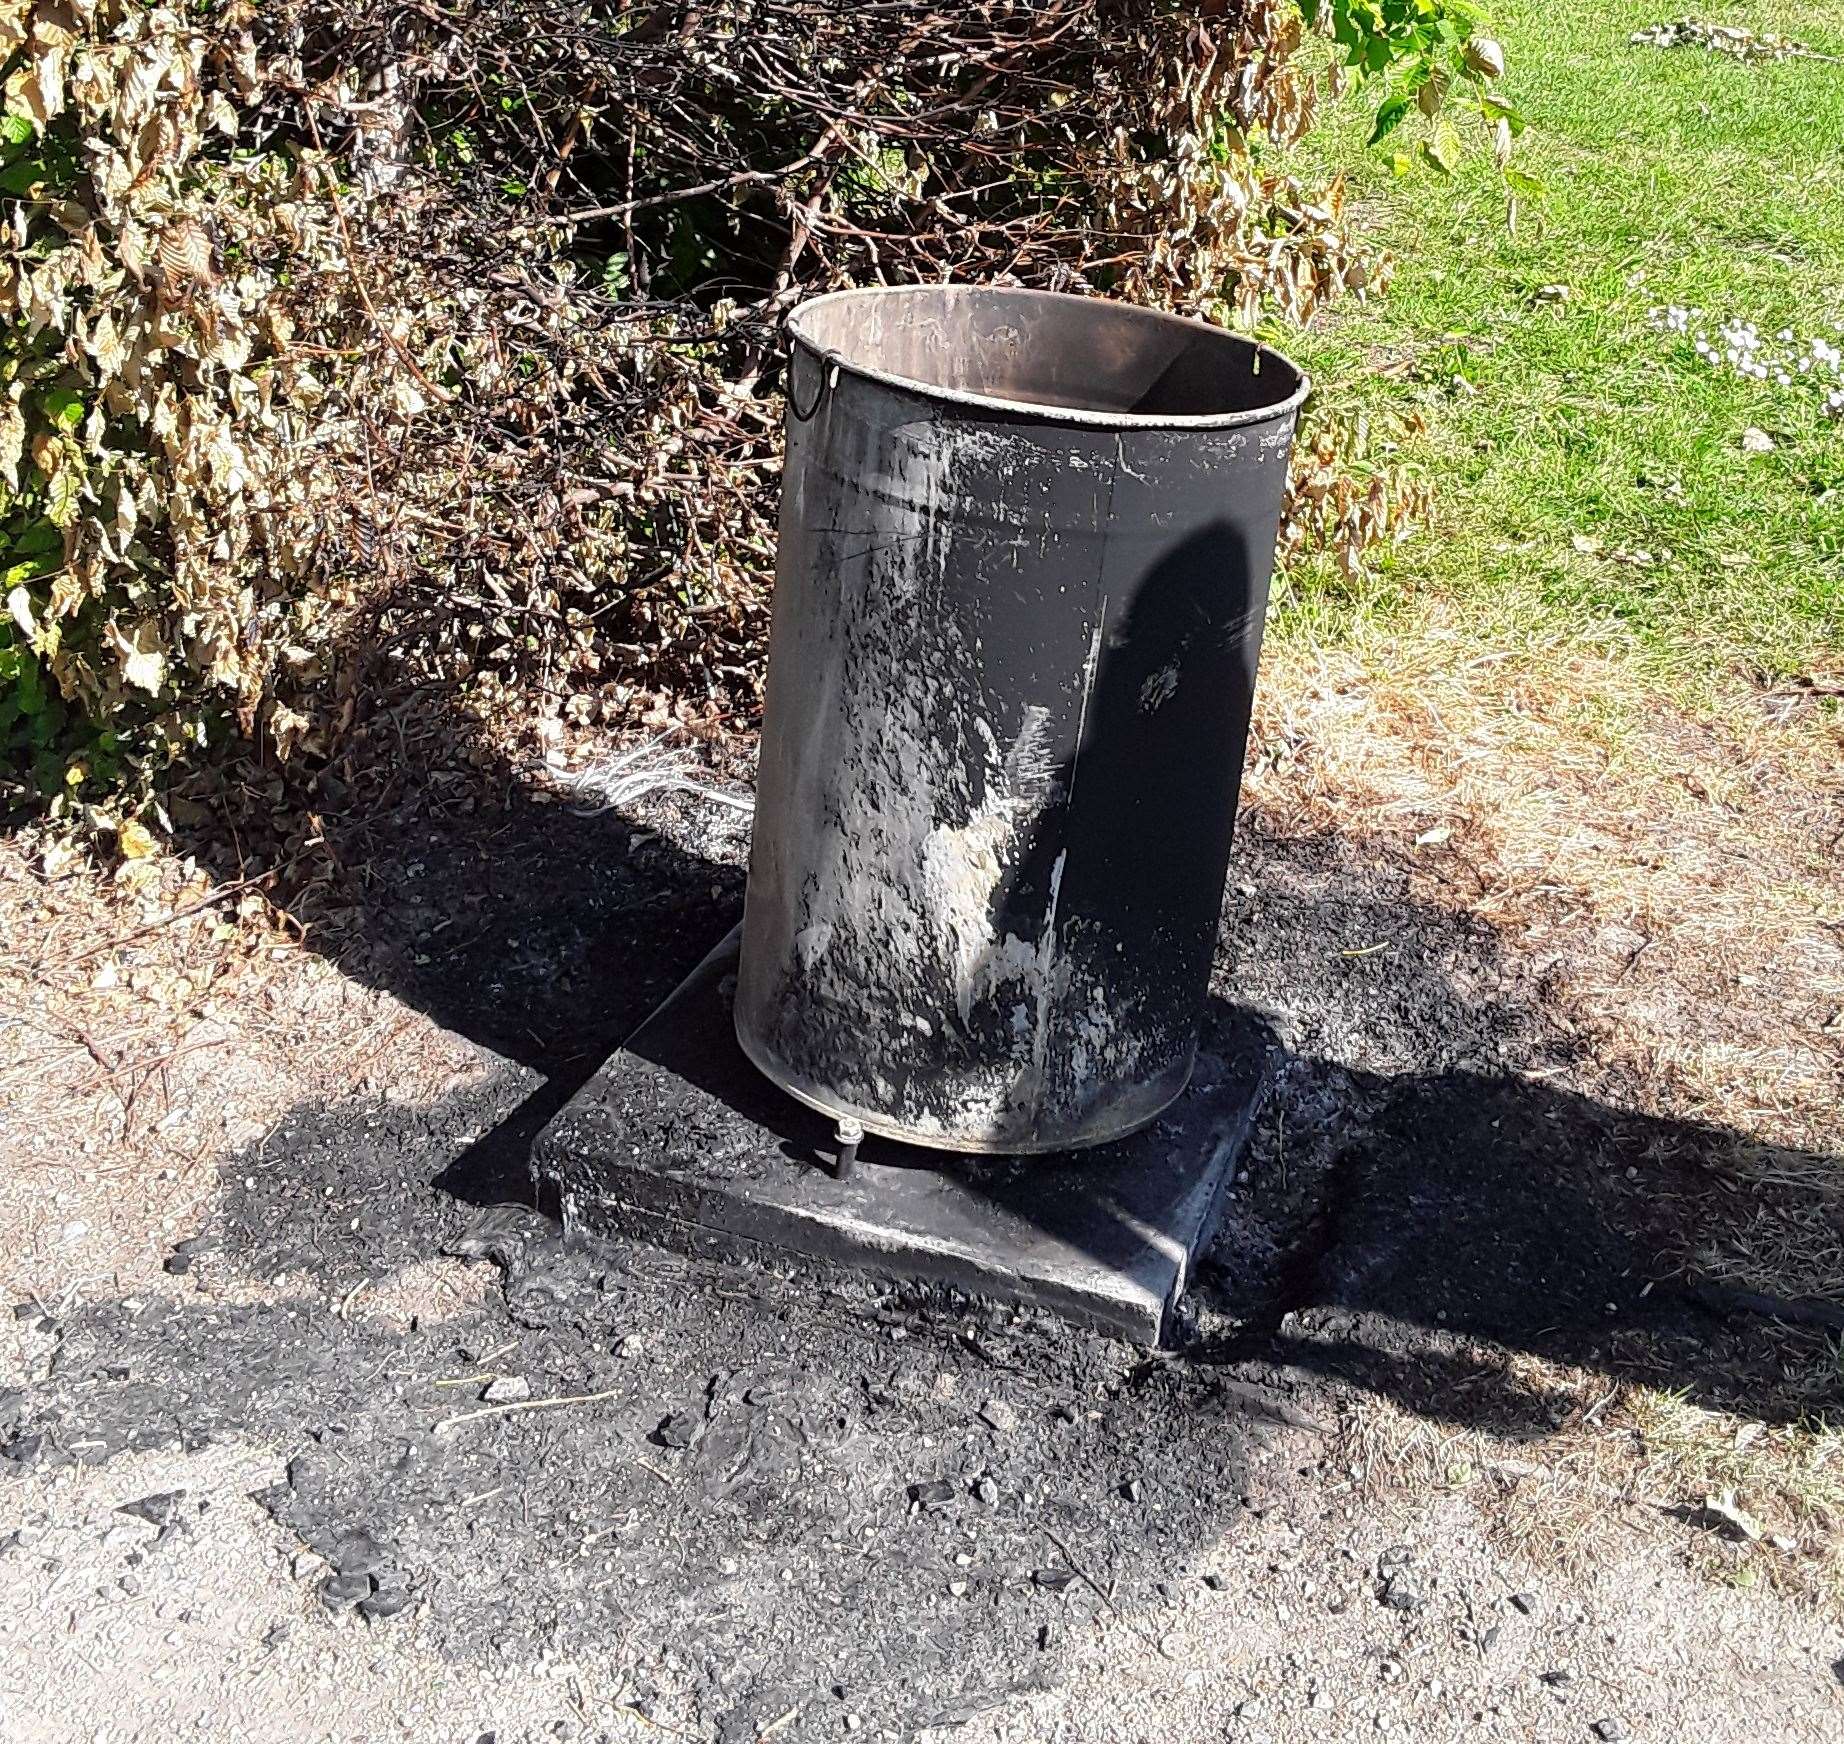 Ashford Borough Council has had to replace numerous bins during lockdown